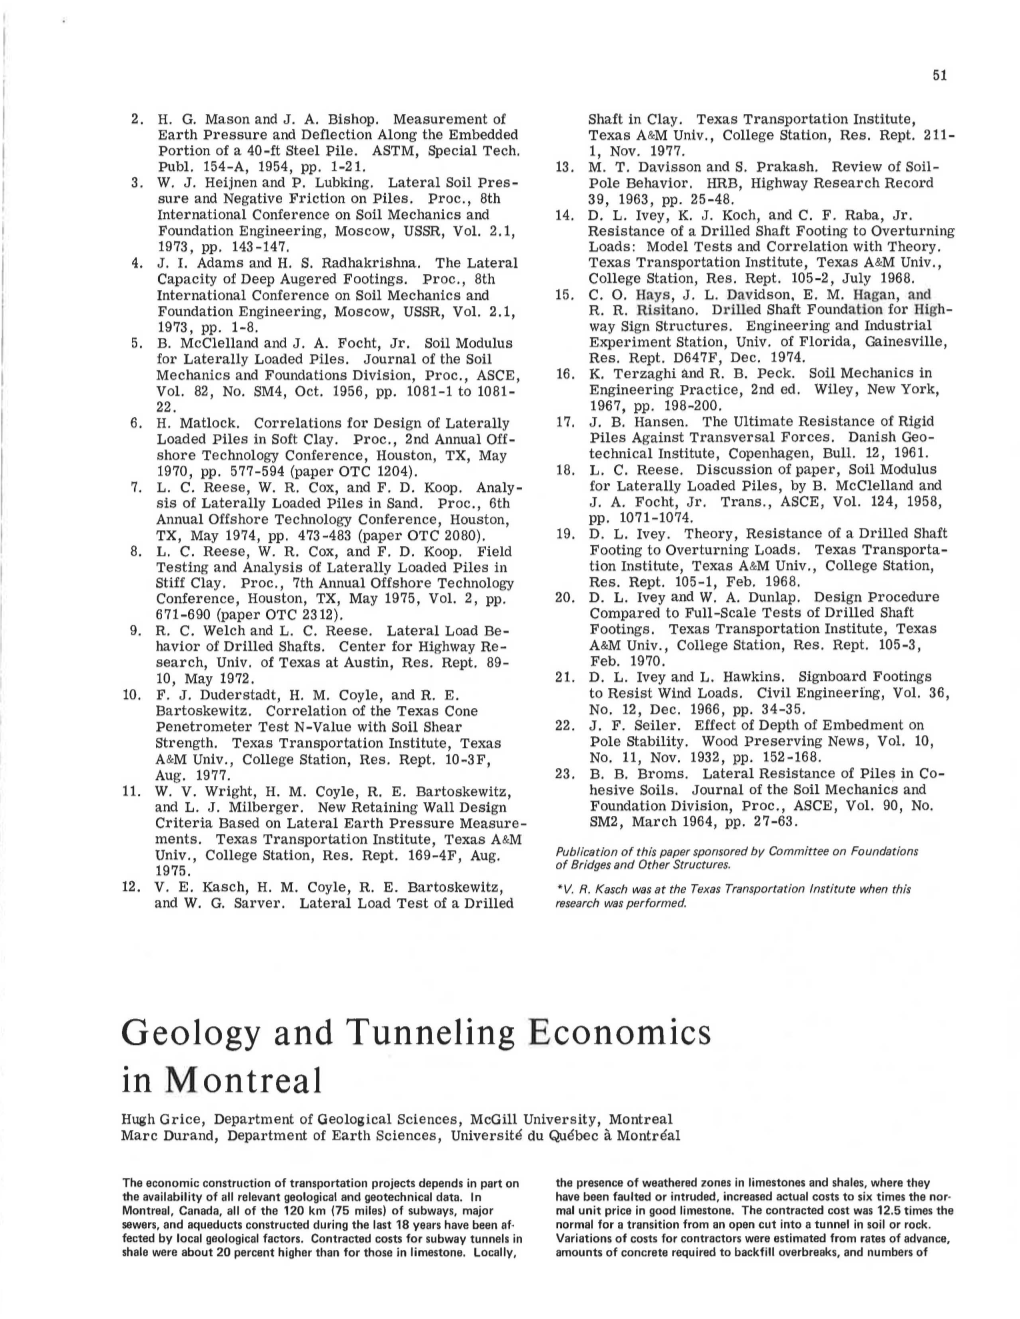 Geology and Tunneling Economics in Montreal